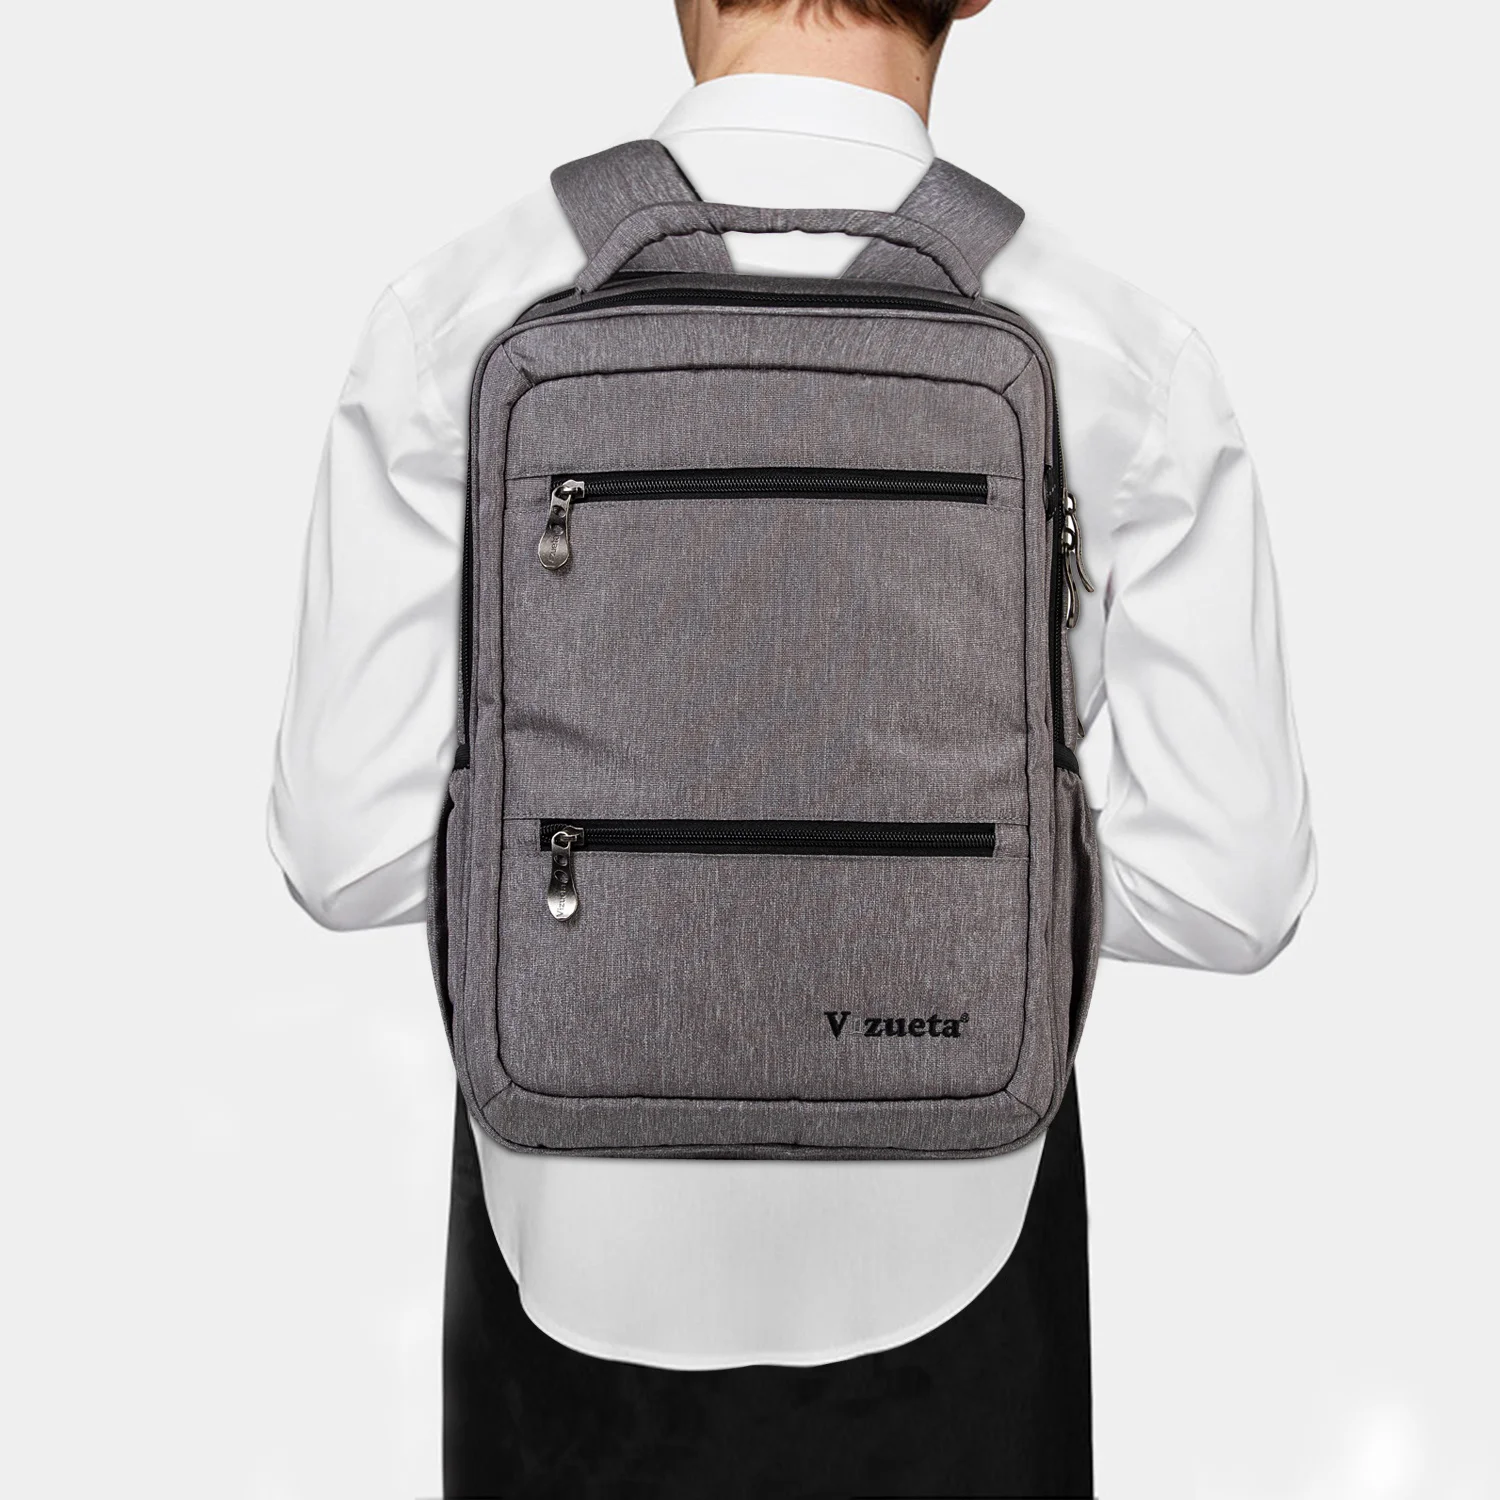 

The New Design Fashion Backpack Fully Protective Laptop Bags Other Working Backpacks Bag, Accept customized logo